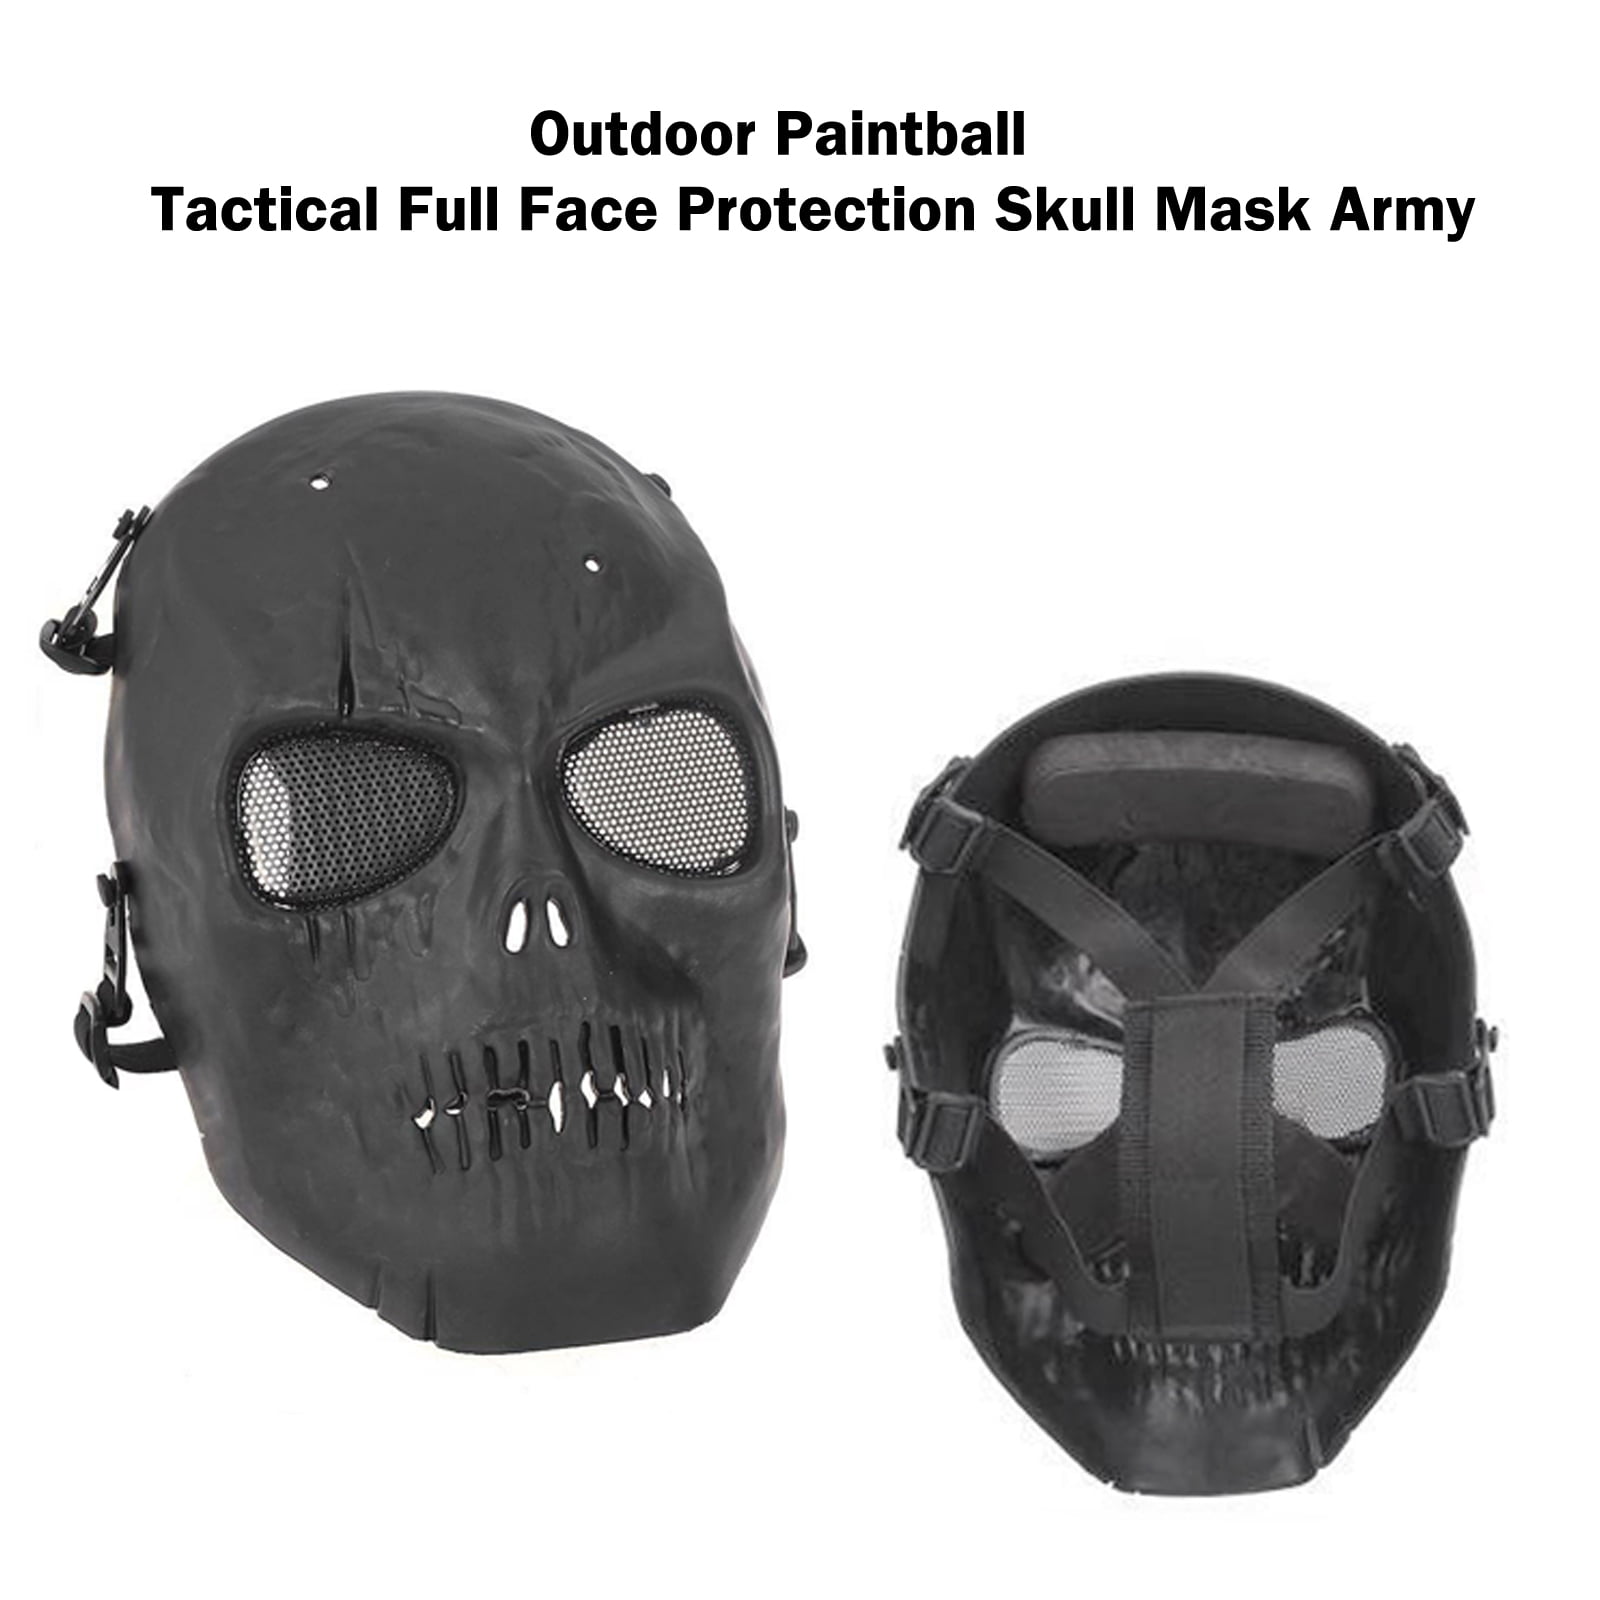 Outdoor Paintball Tactical Full Face Protection Skull Mask Army SA 